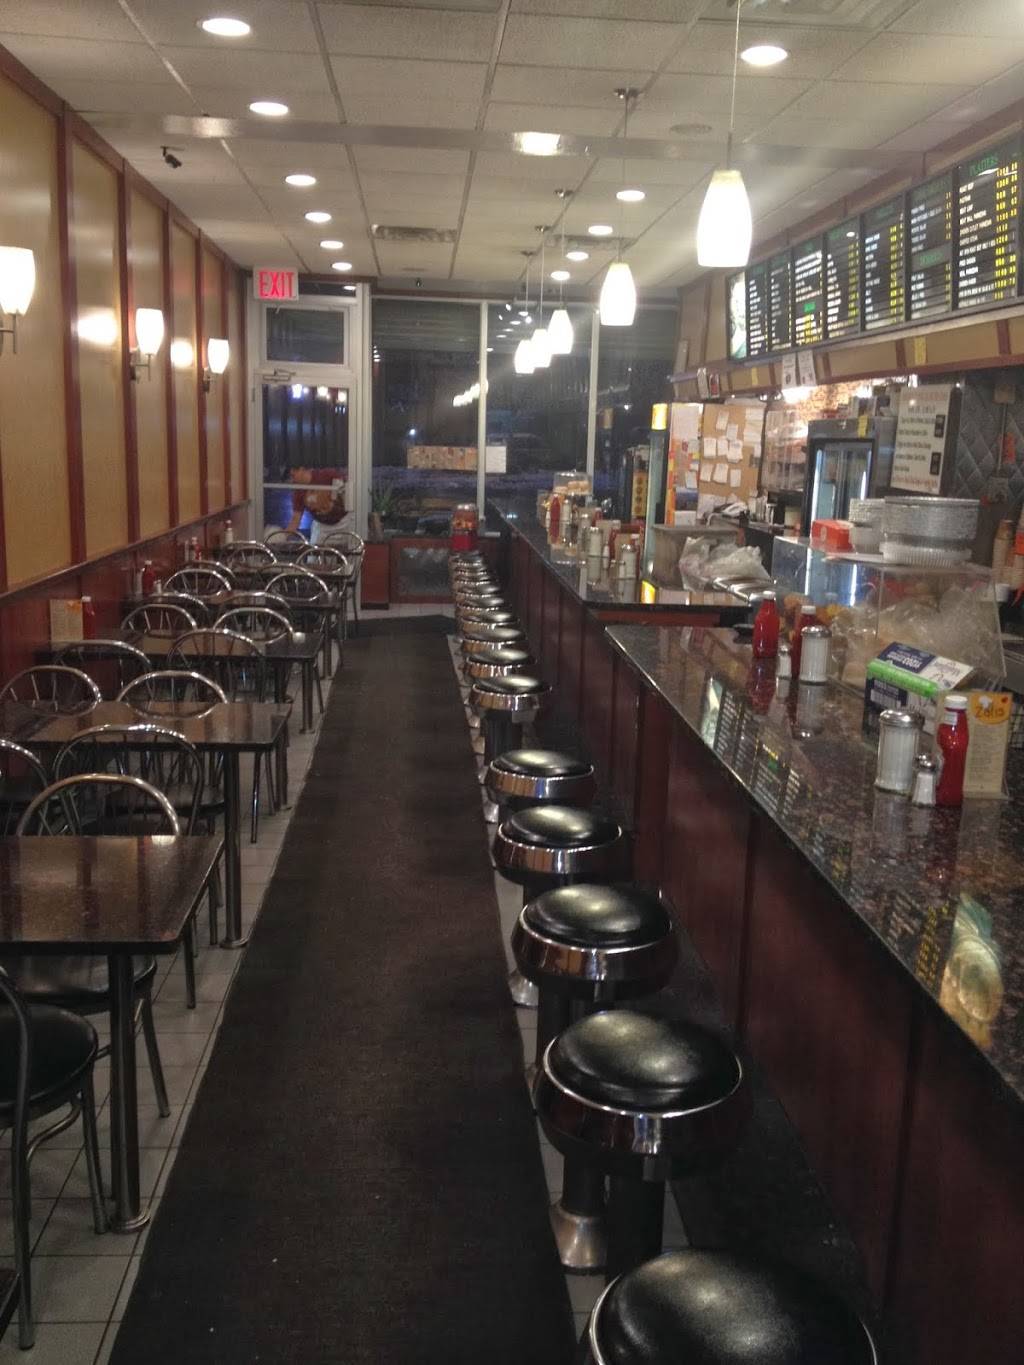 Zafis Luncheonette | restaurant | 500 Grand St, New York, NY 10002, USA | 2125332415 OR +1 212-533-2415